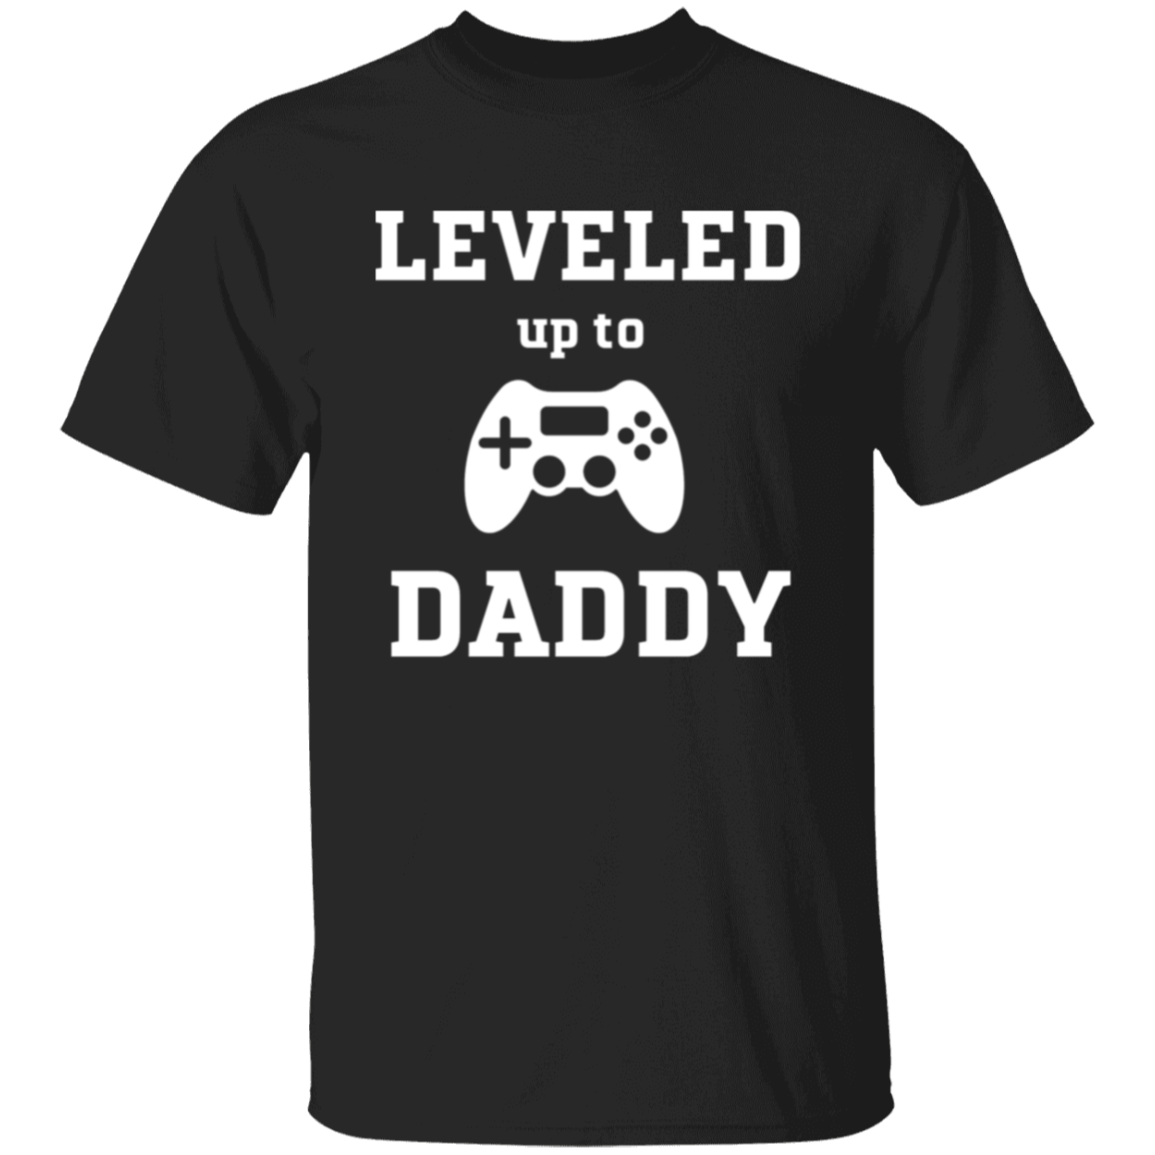 Leveled Up to Daddy Player 2 Has Entered the Game Shirt